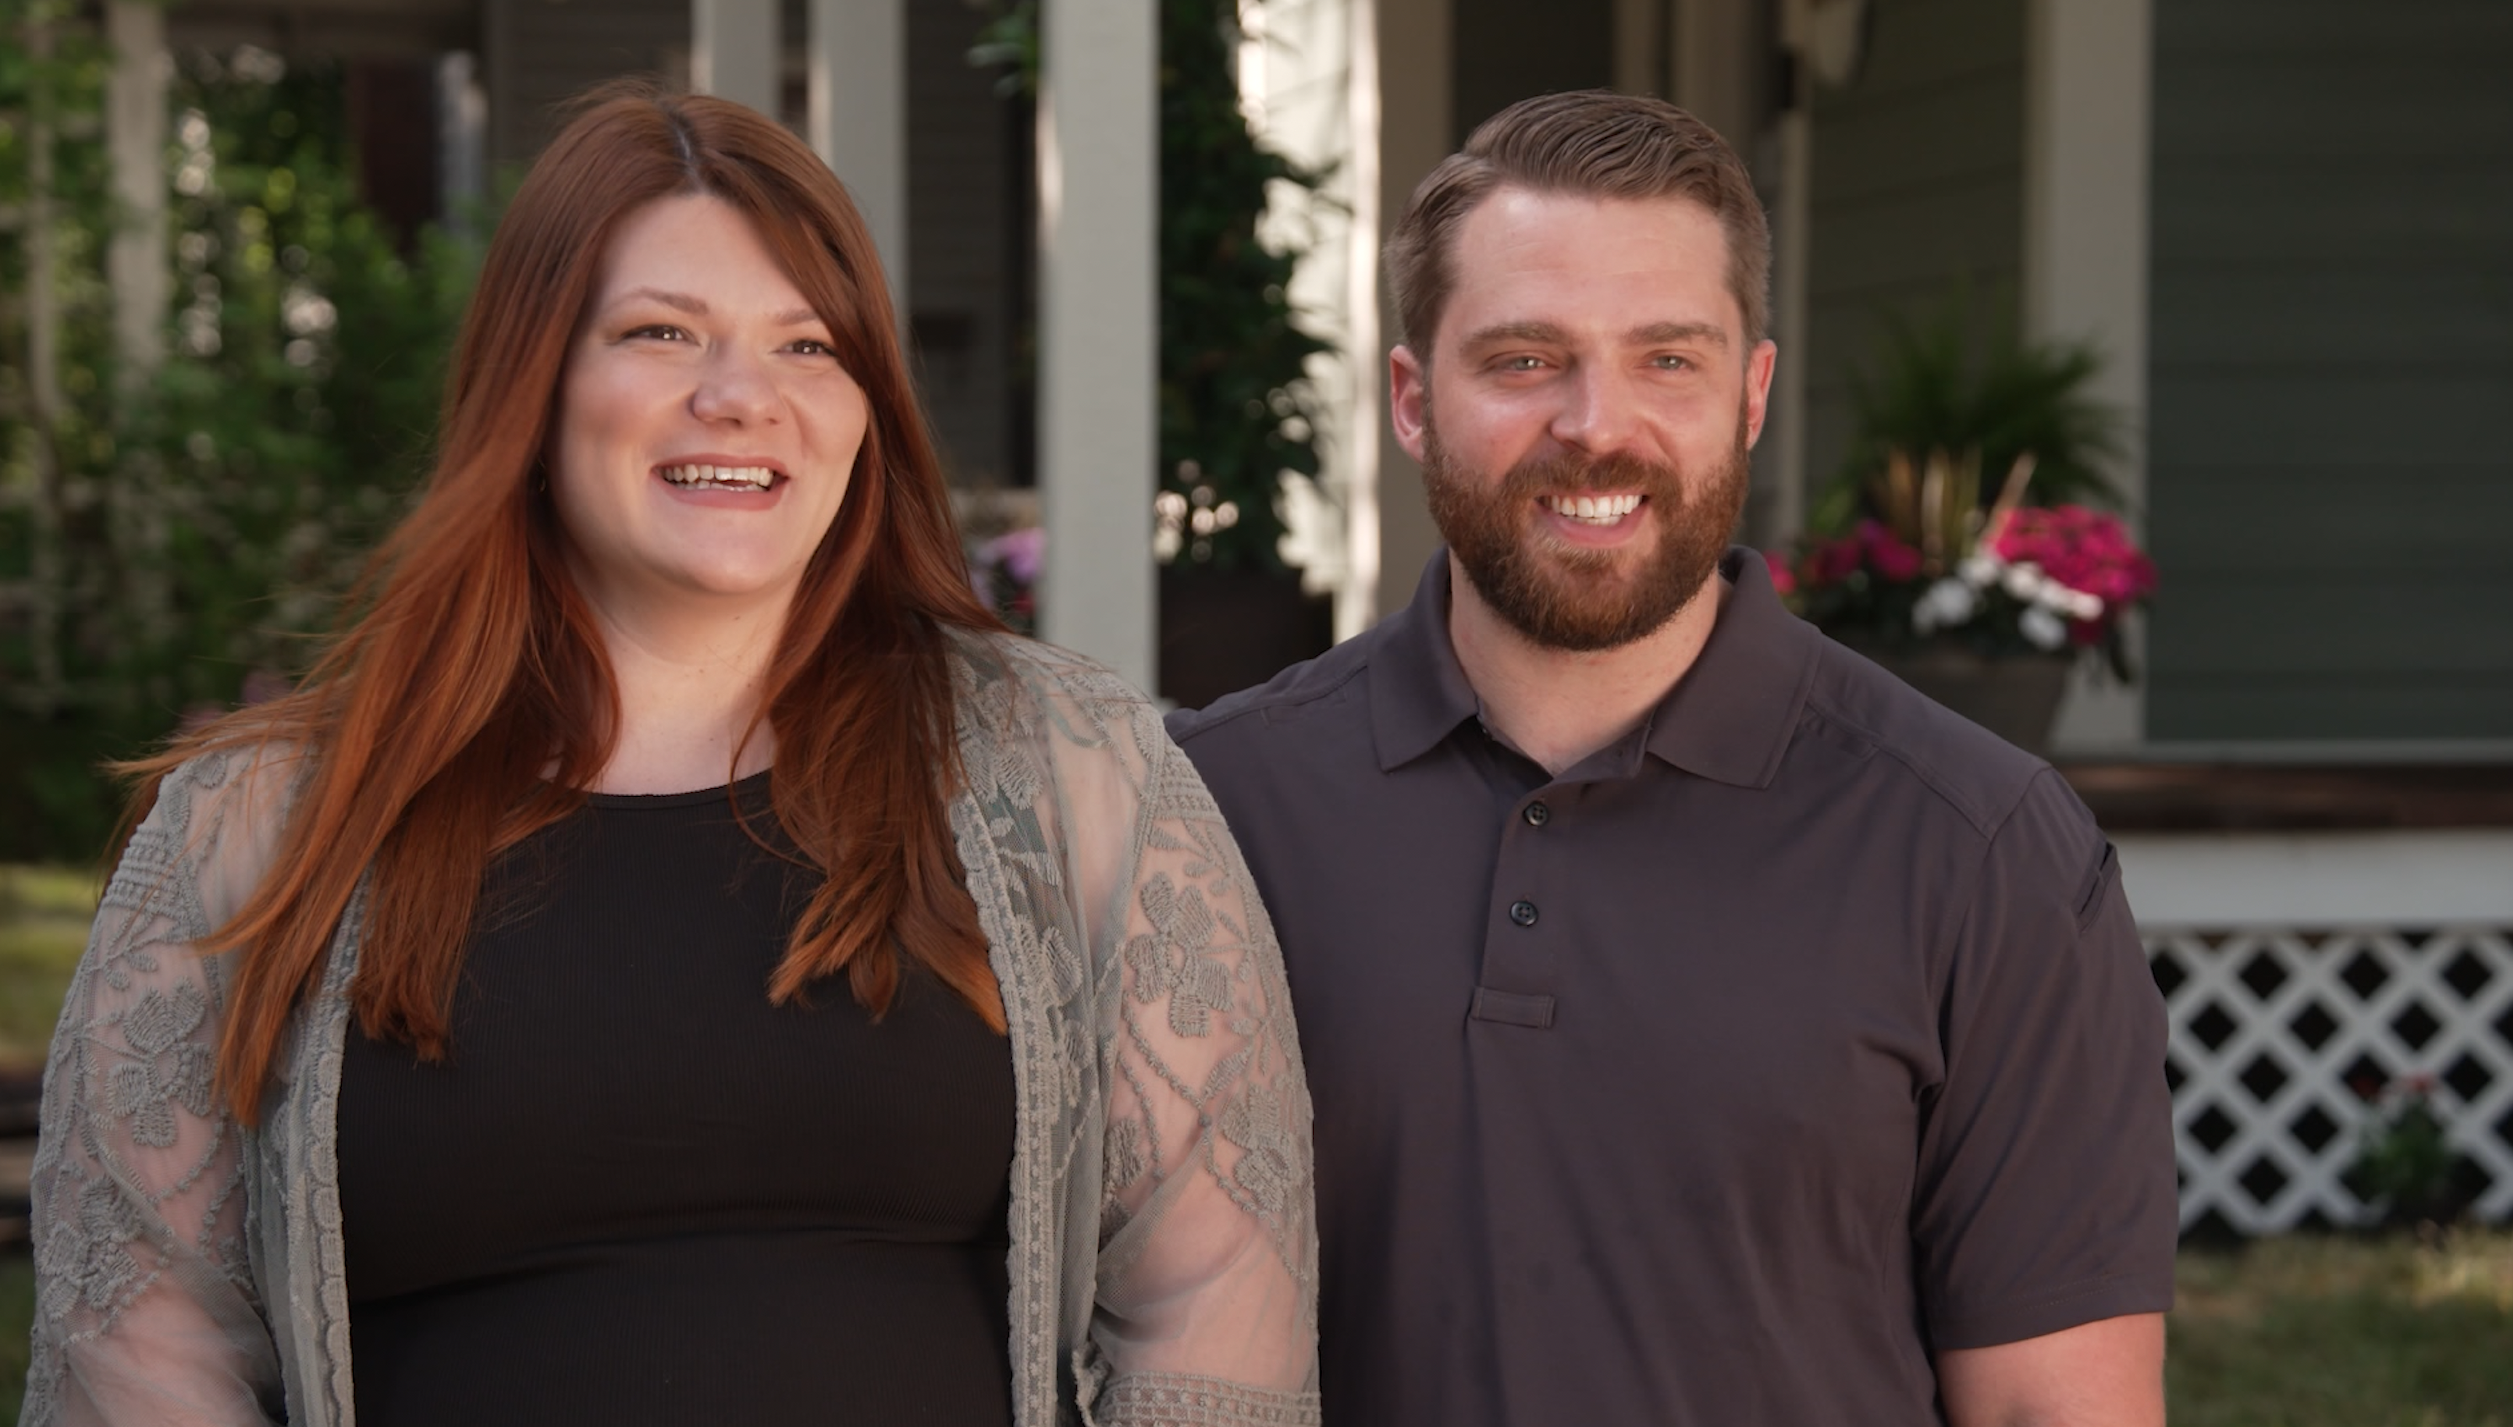 Meet our winners: Cory and Nicole Bolling